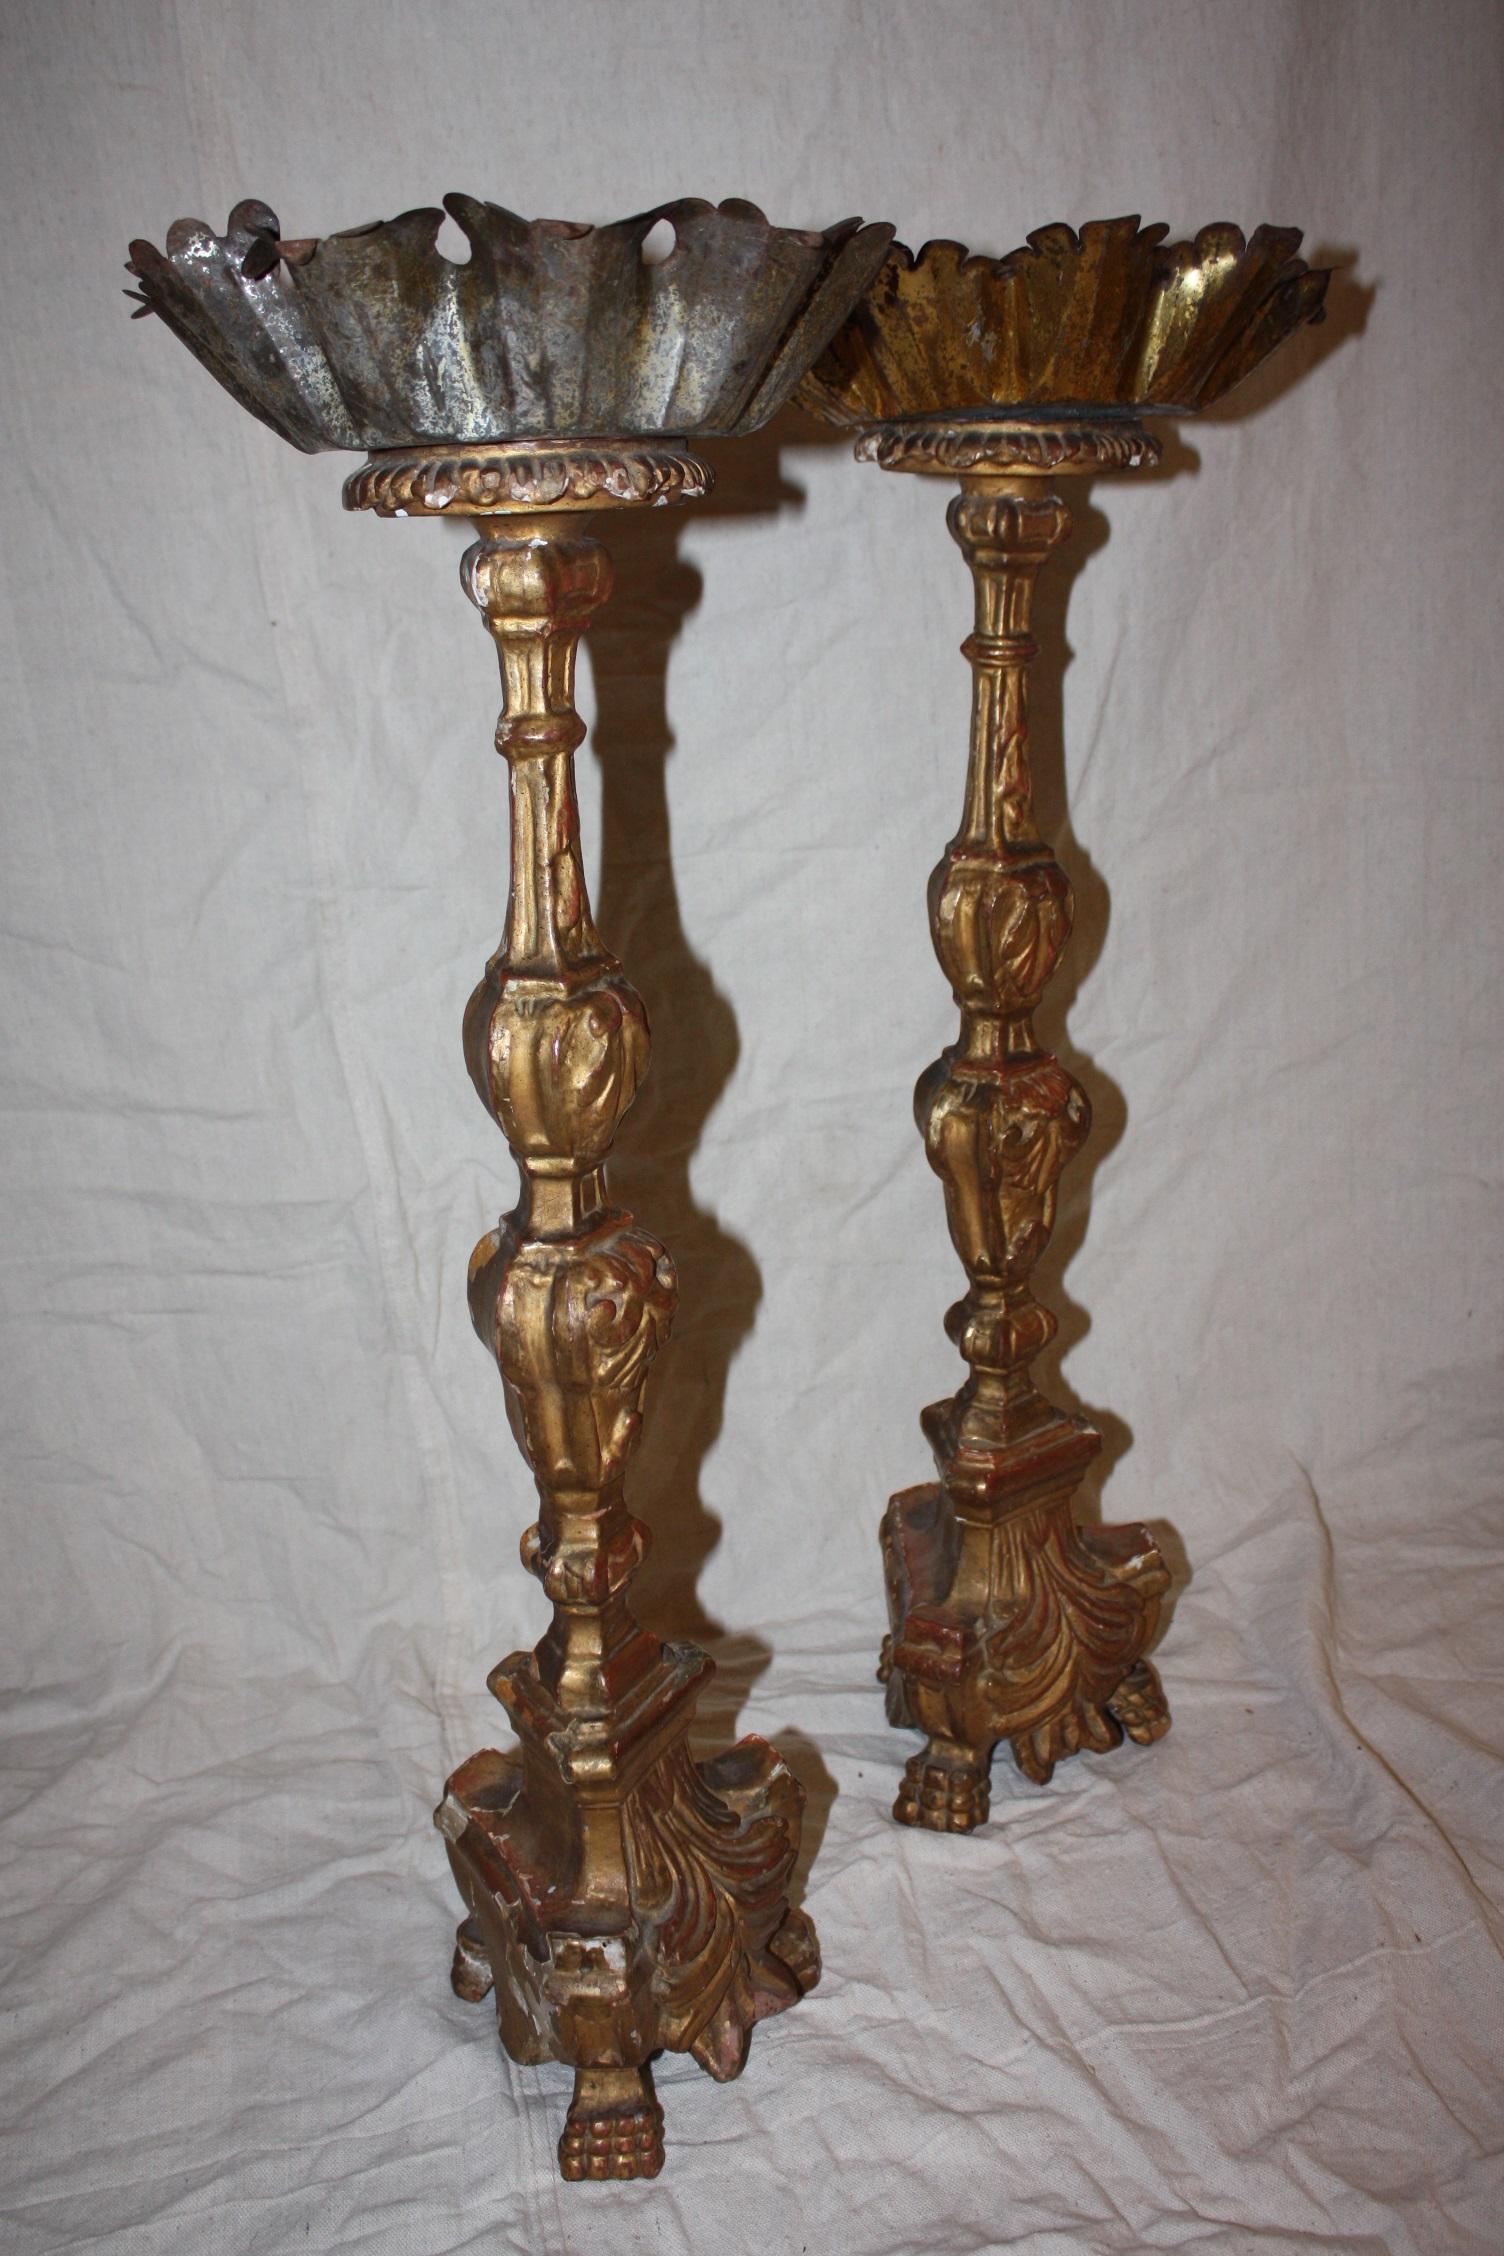 This is a great looking pair of tall Italian candlesticks dating to the early 1800s.

Dimensions below are taken at the base of the candles. The height is 27